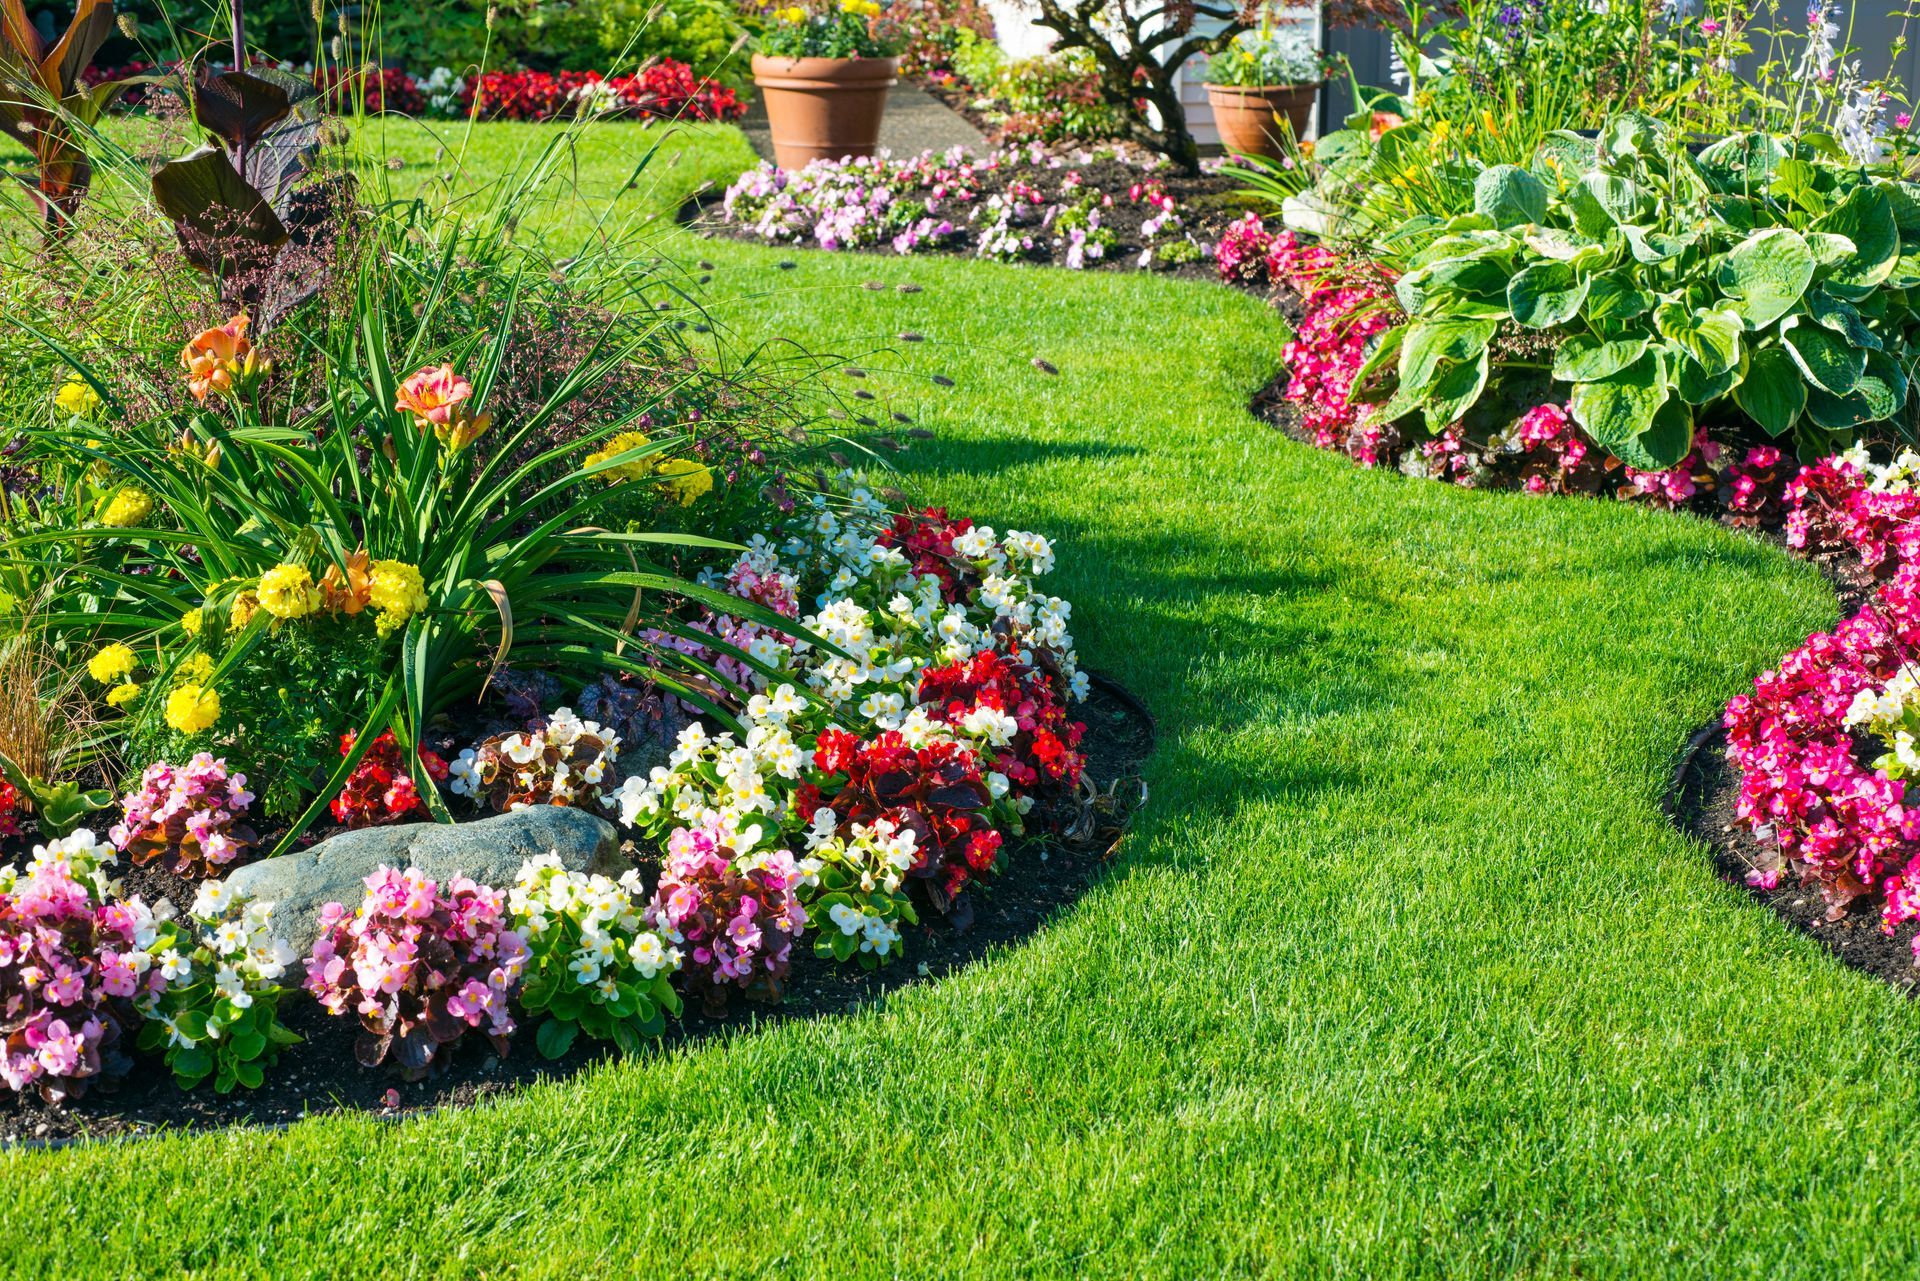 Vibrant and colorful flowers in full bloom create a stunning garden landscape.